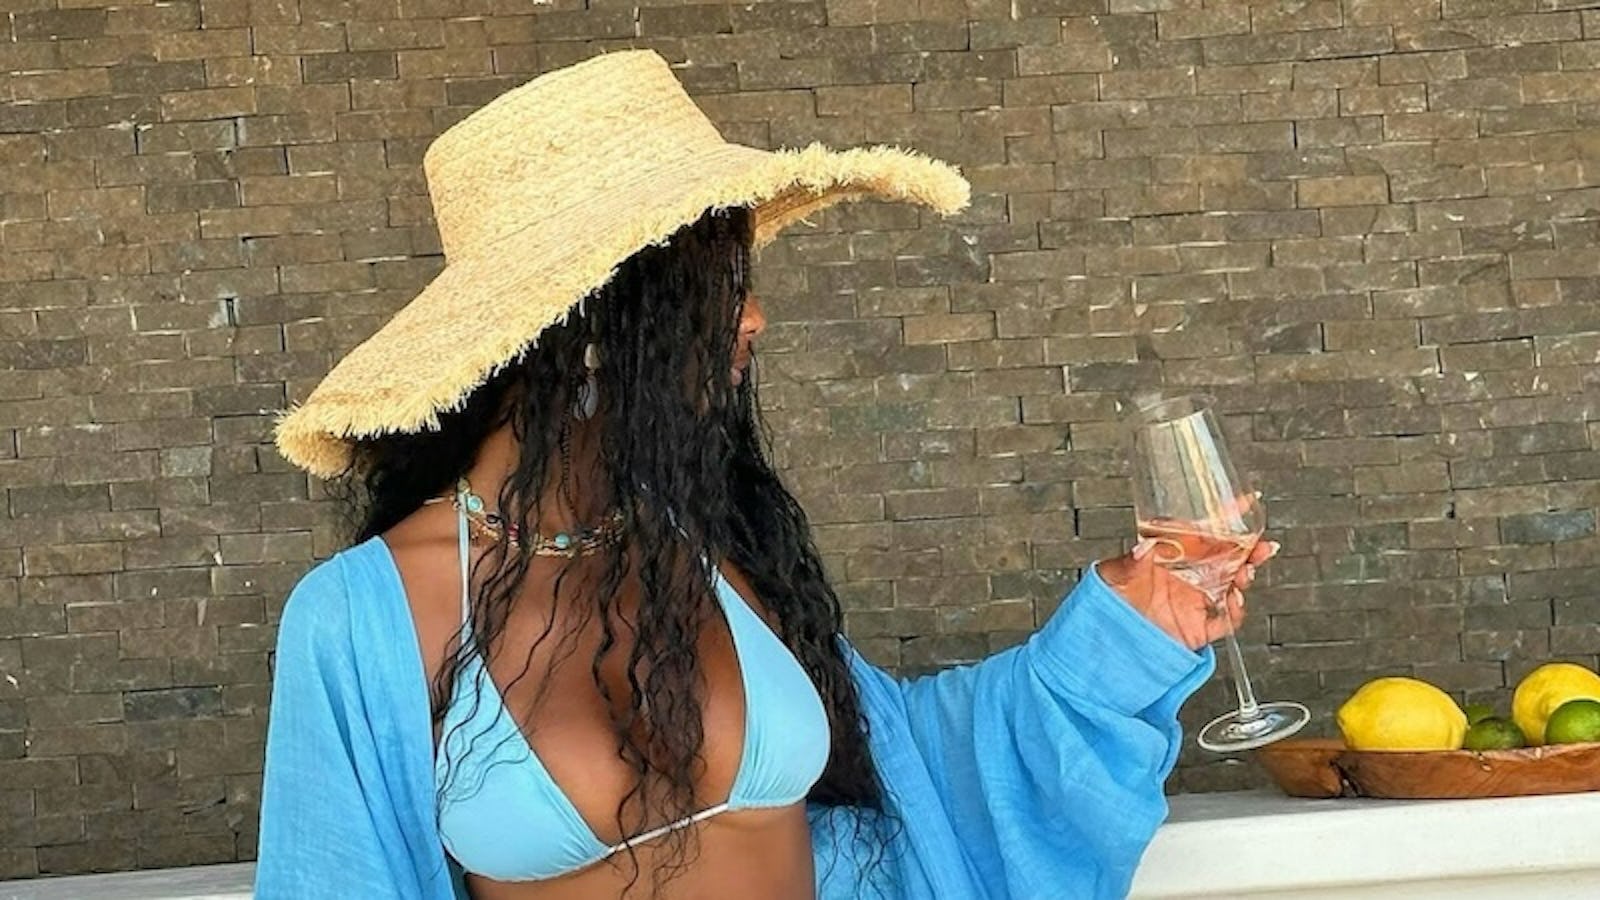 stands against brick background wearing blue string bikini with matching cover up and sarong with wide-brim straw hat, wine glass in hand